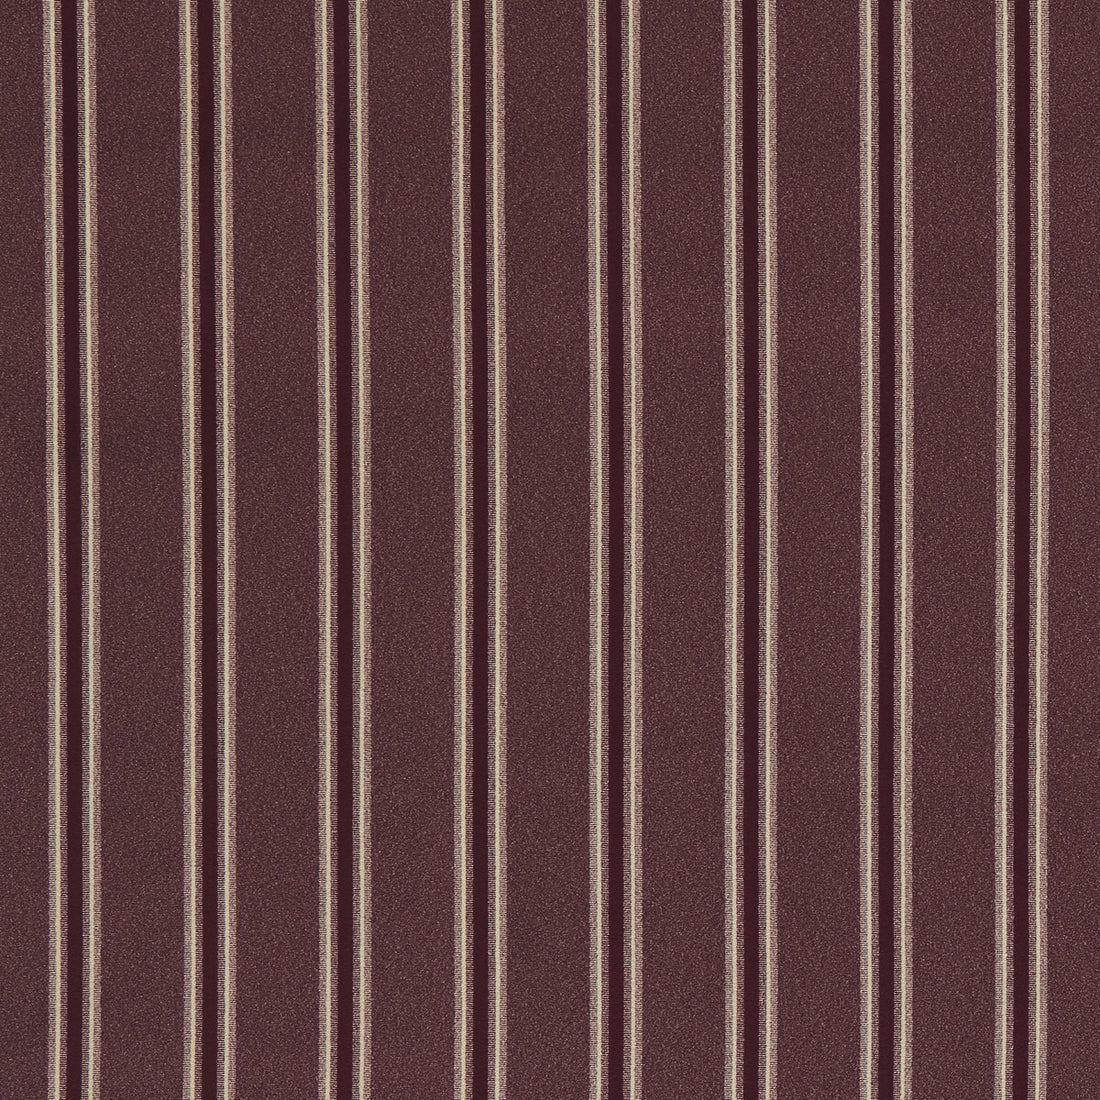 Bowfell fabric in mulberry color - pattern F1689/06.CAC.0 - by Clarke And Clarke in the Whitworth collection